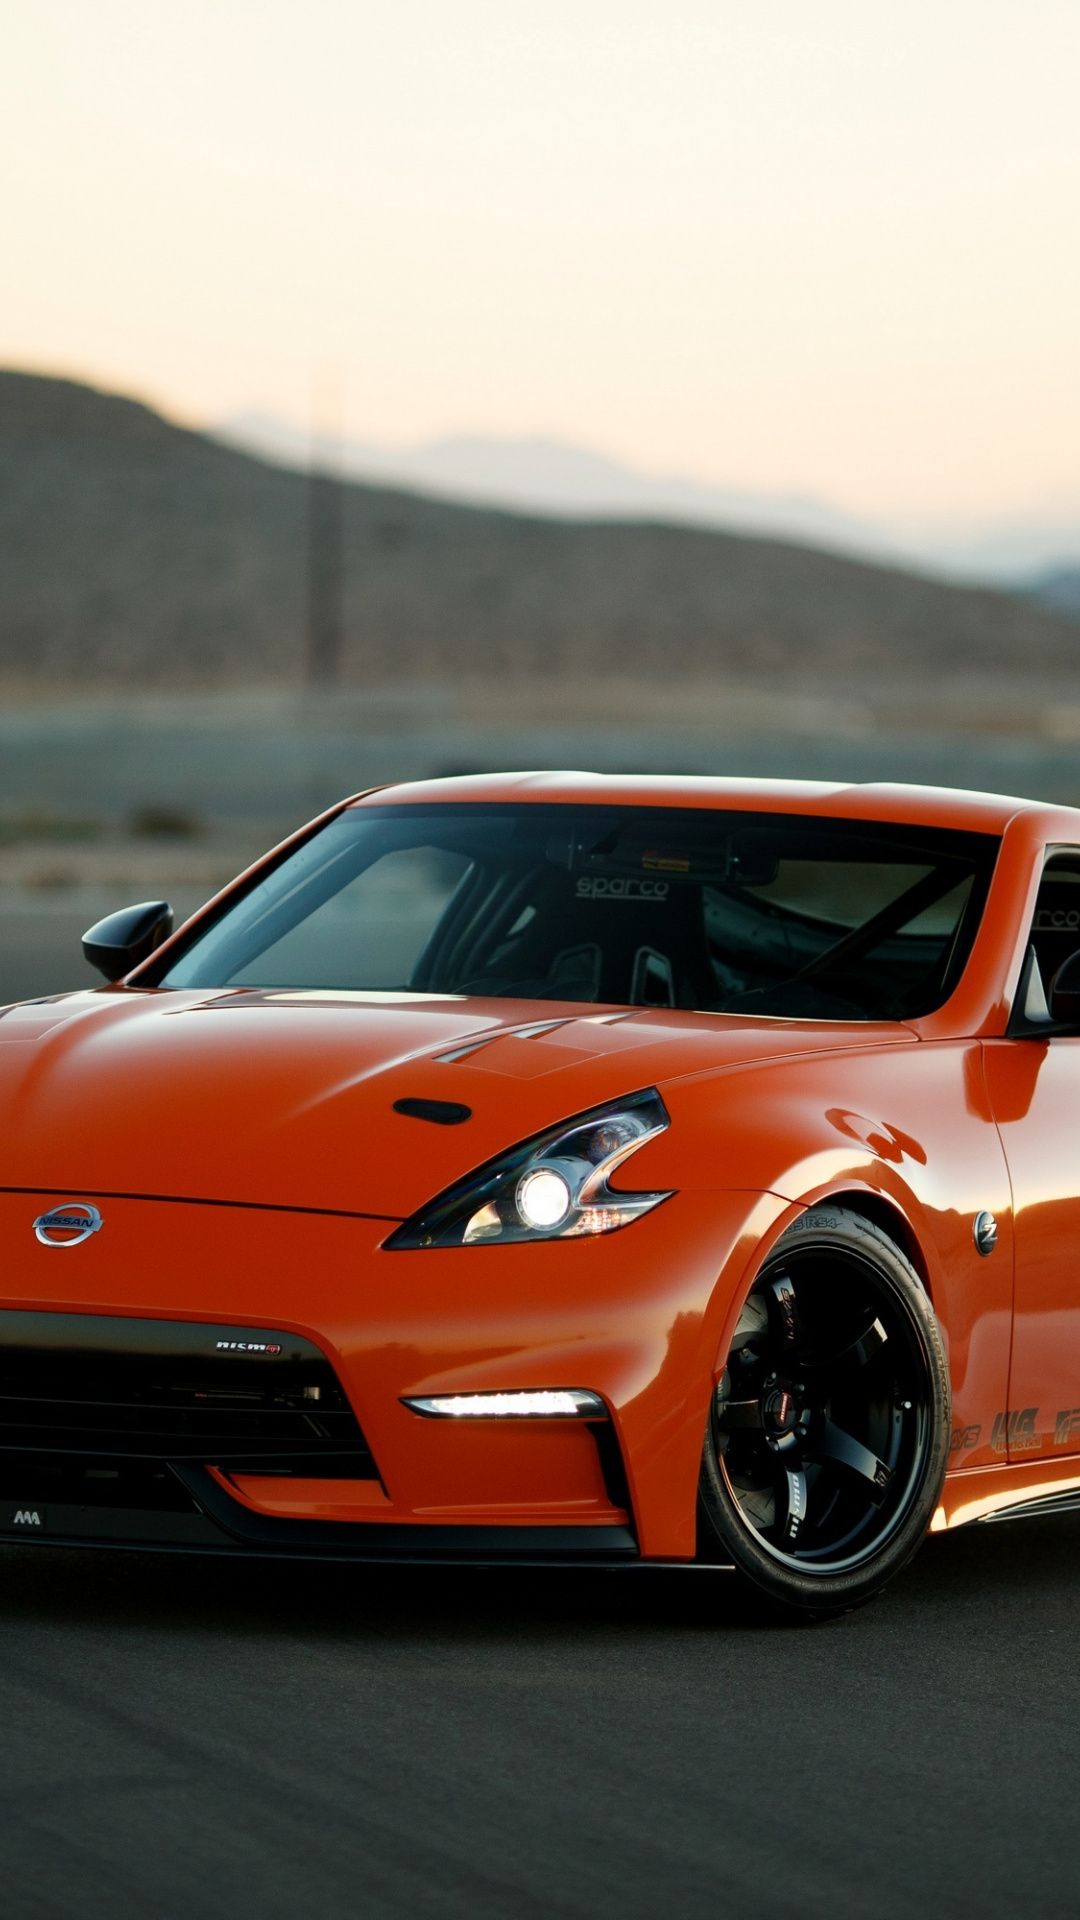 Nissan 370z Photos Download The BEST Free Nissan 370z Stock Photos  HD  Images